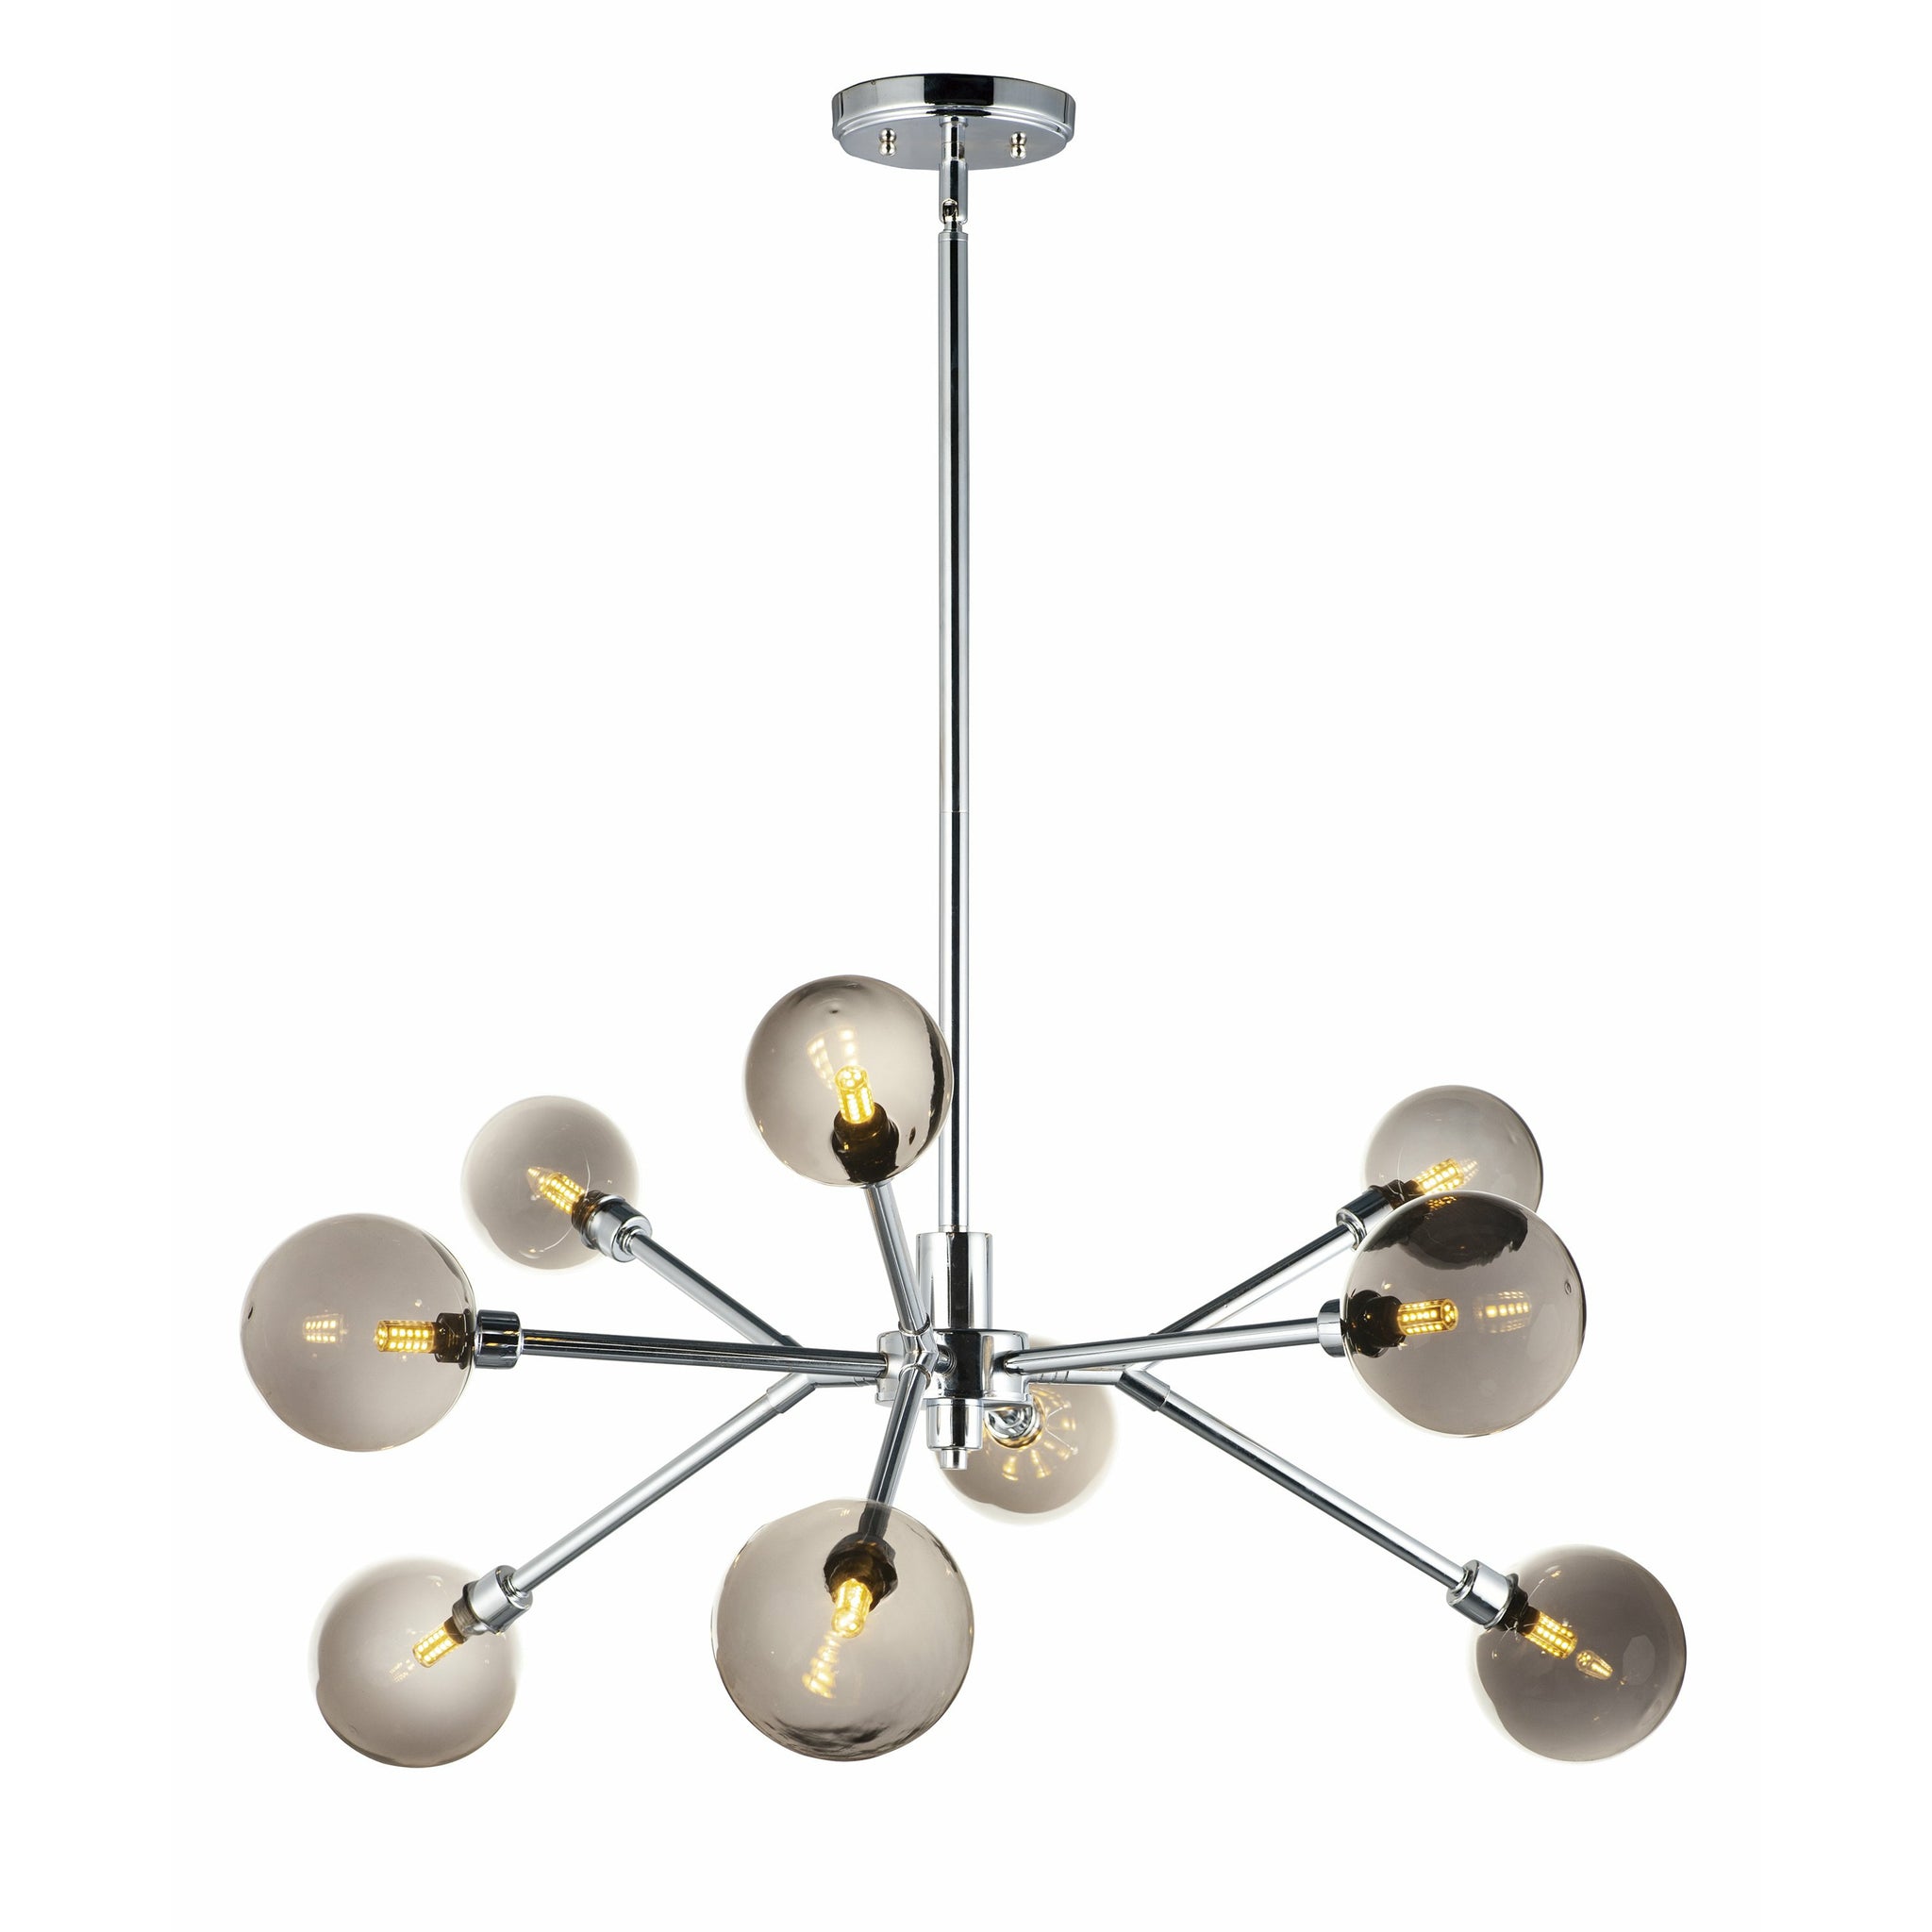 Asteroid Chandelier Polished Chrome